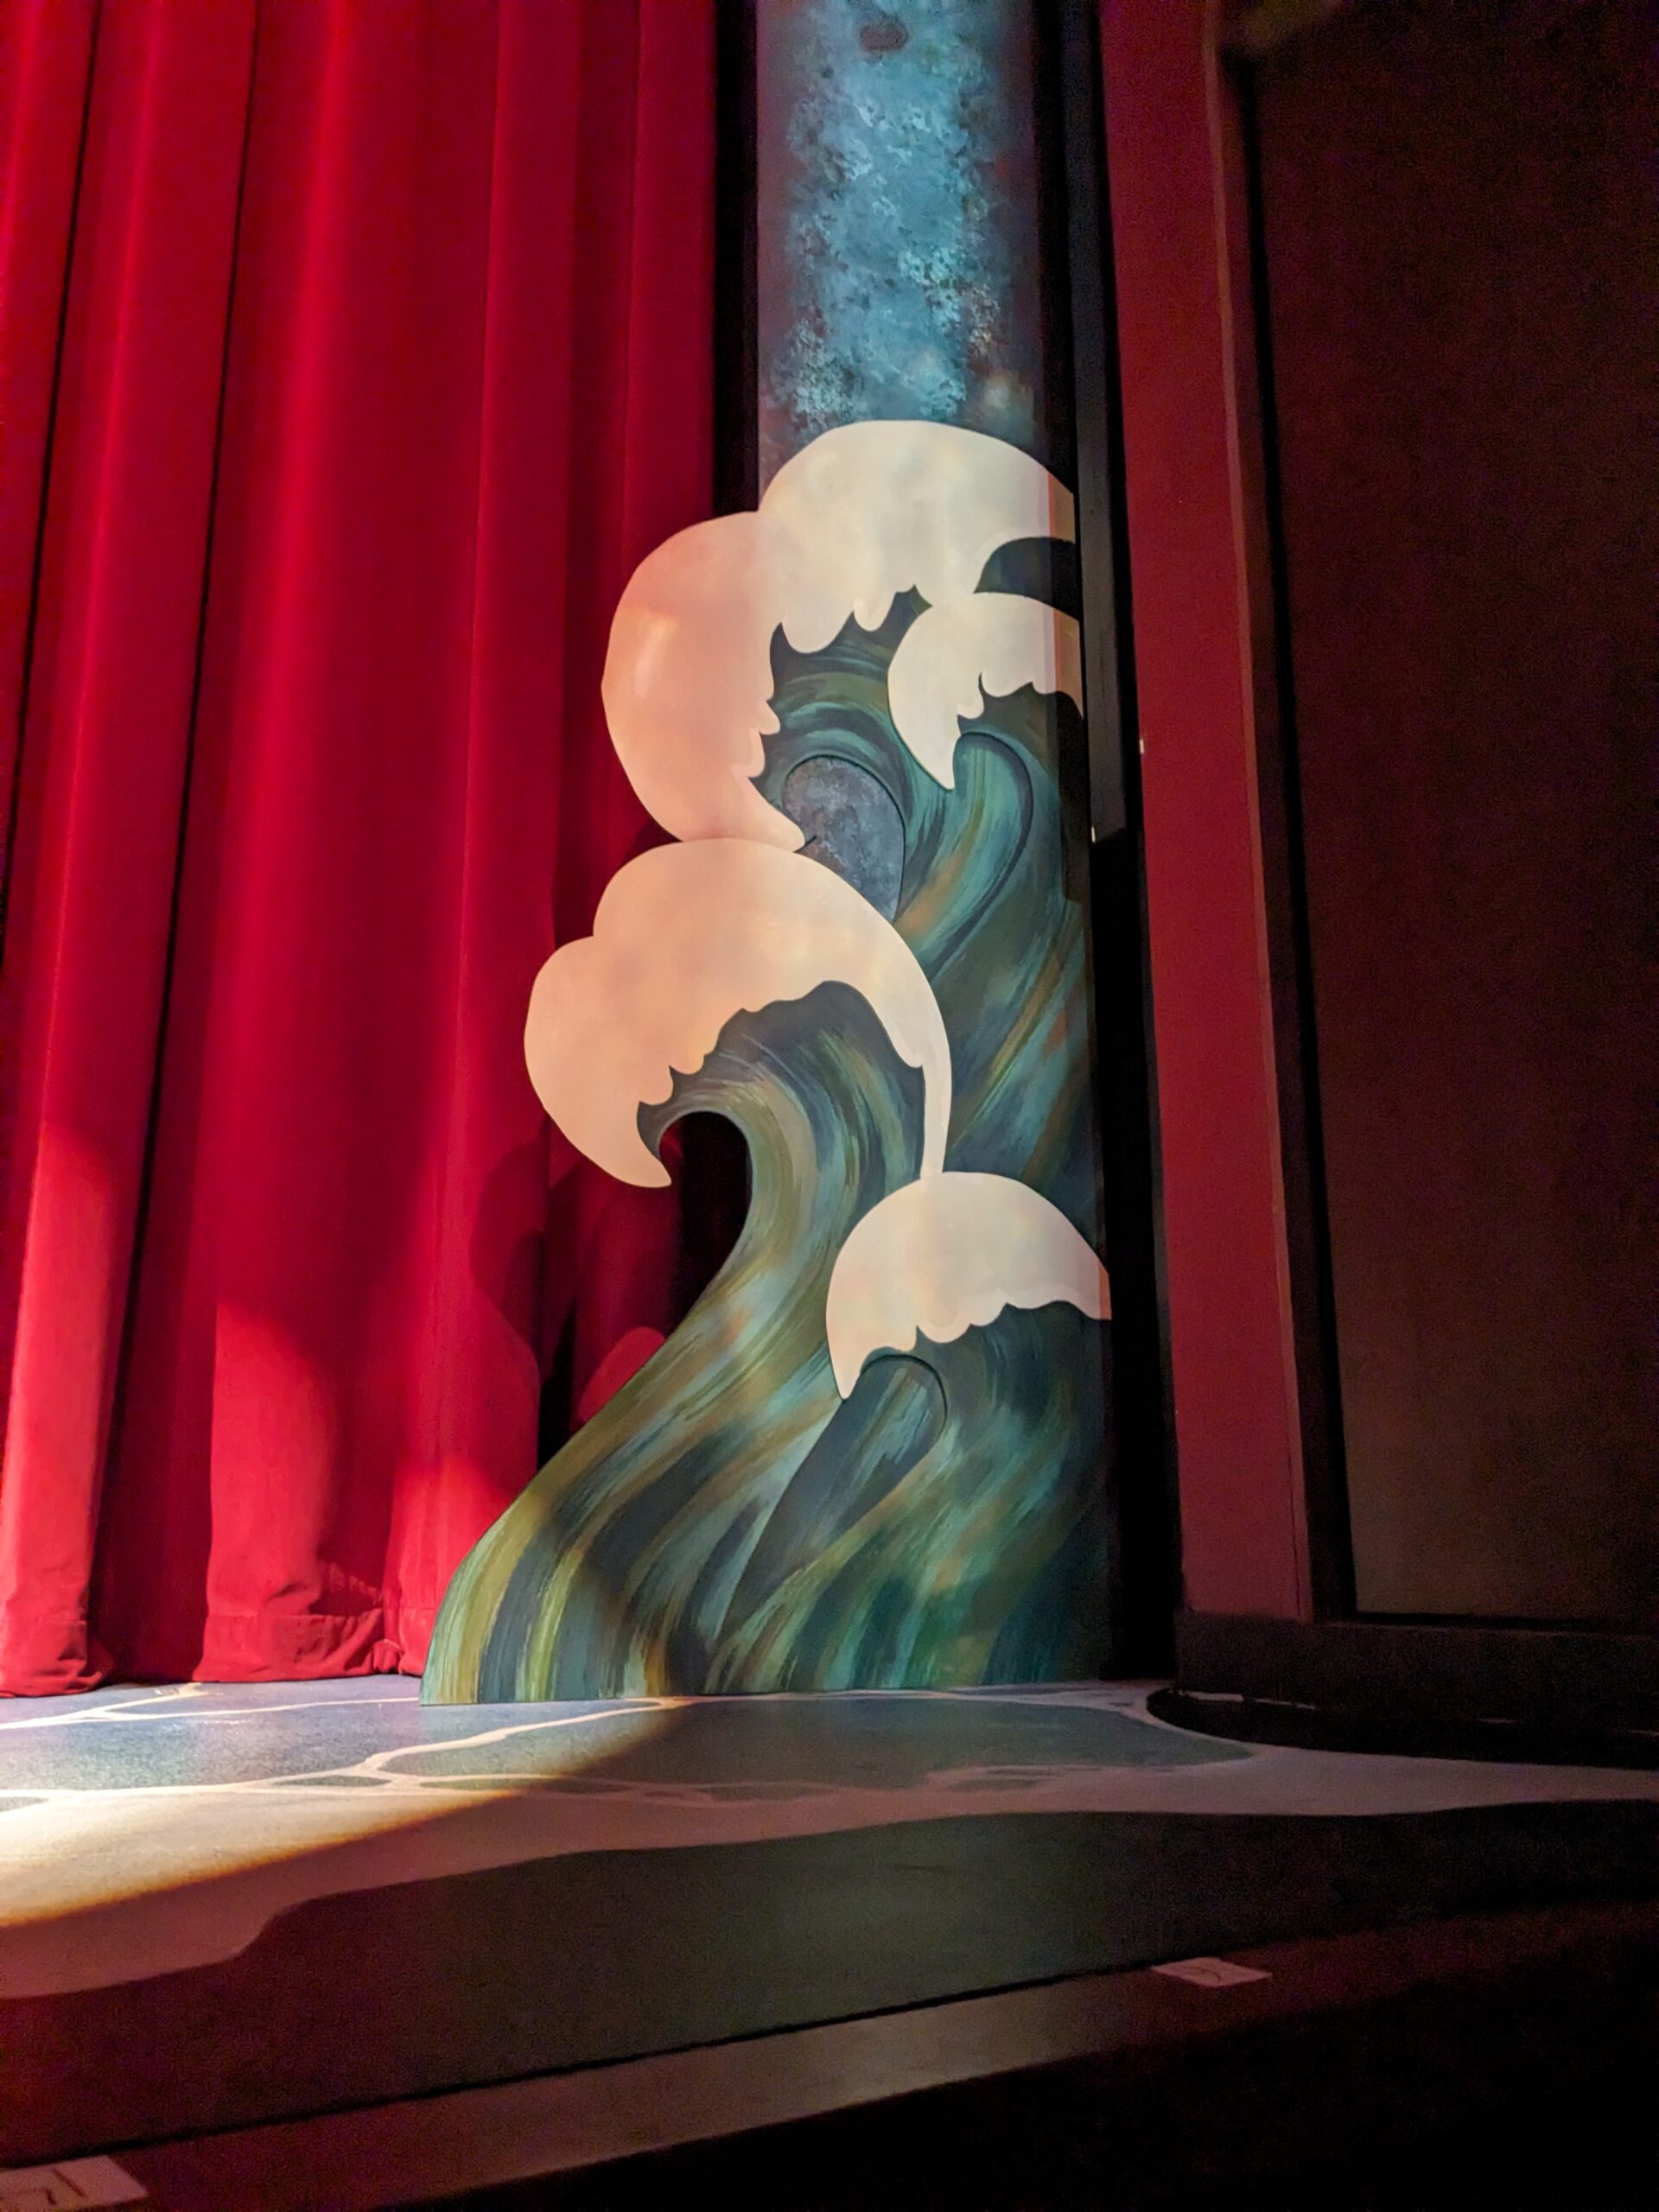 The Little Mermaid at Persephone Theatre